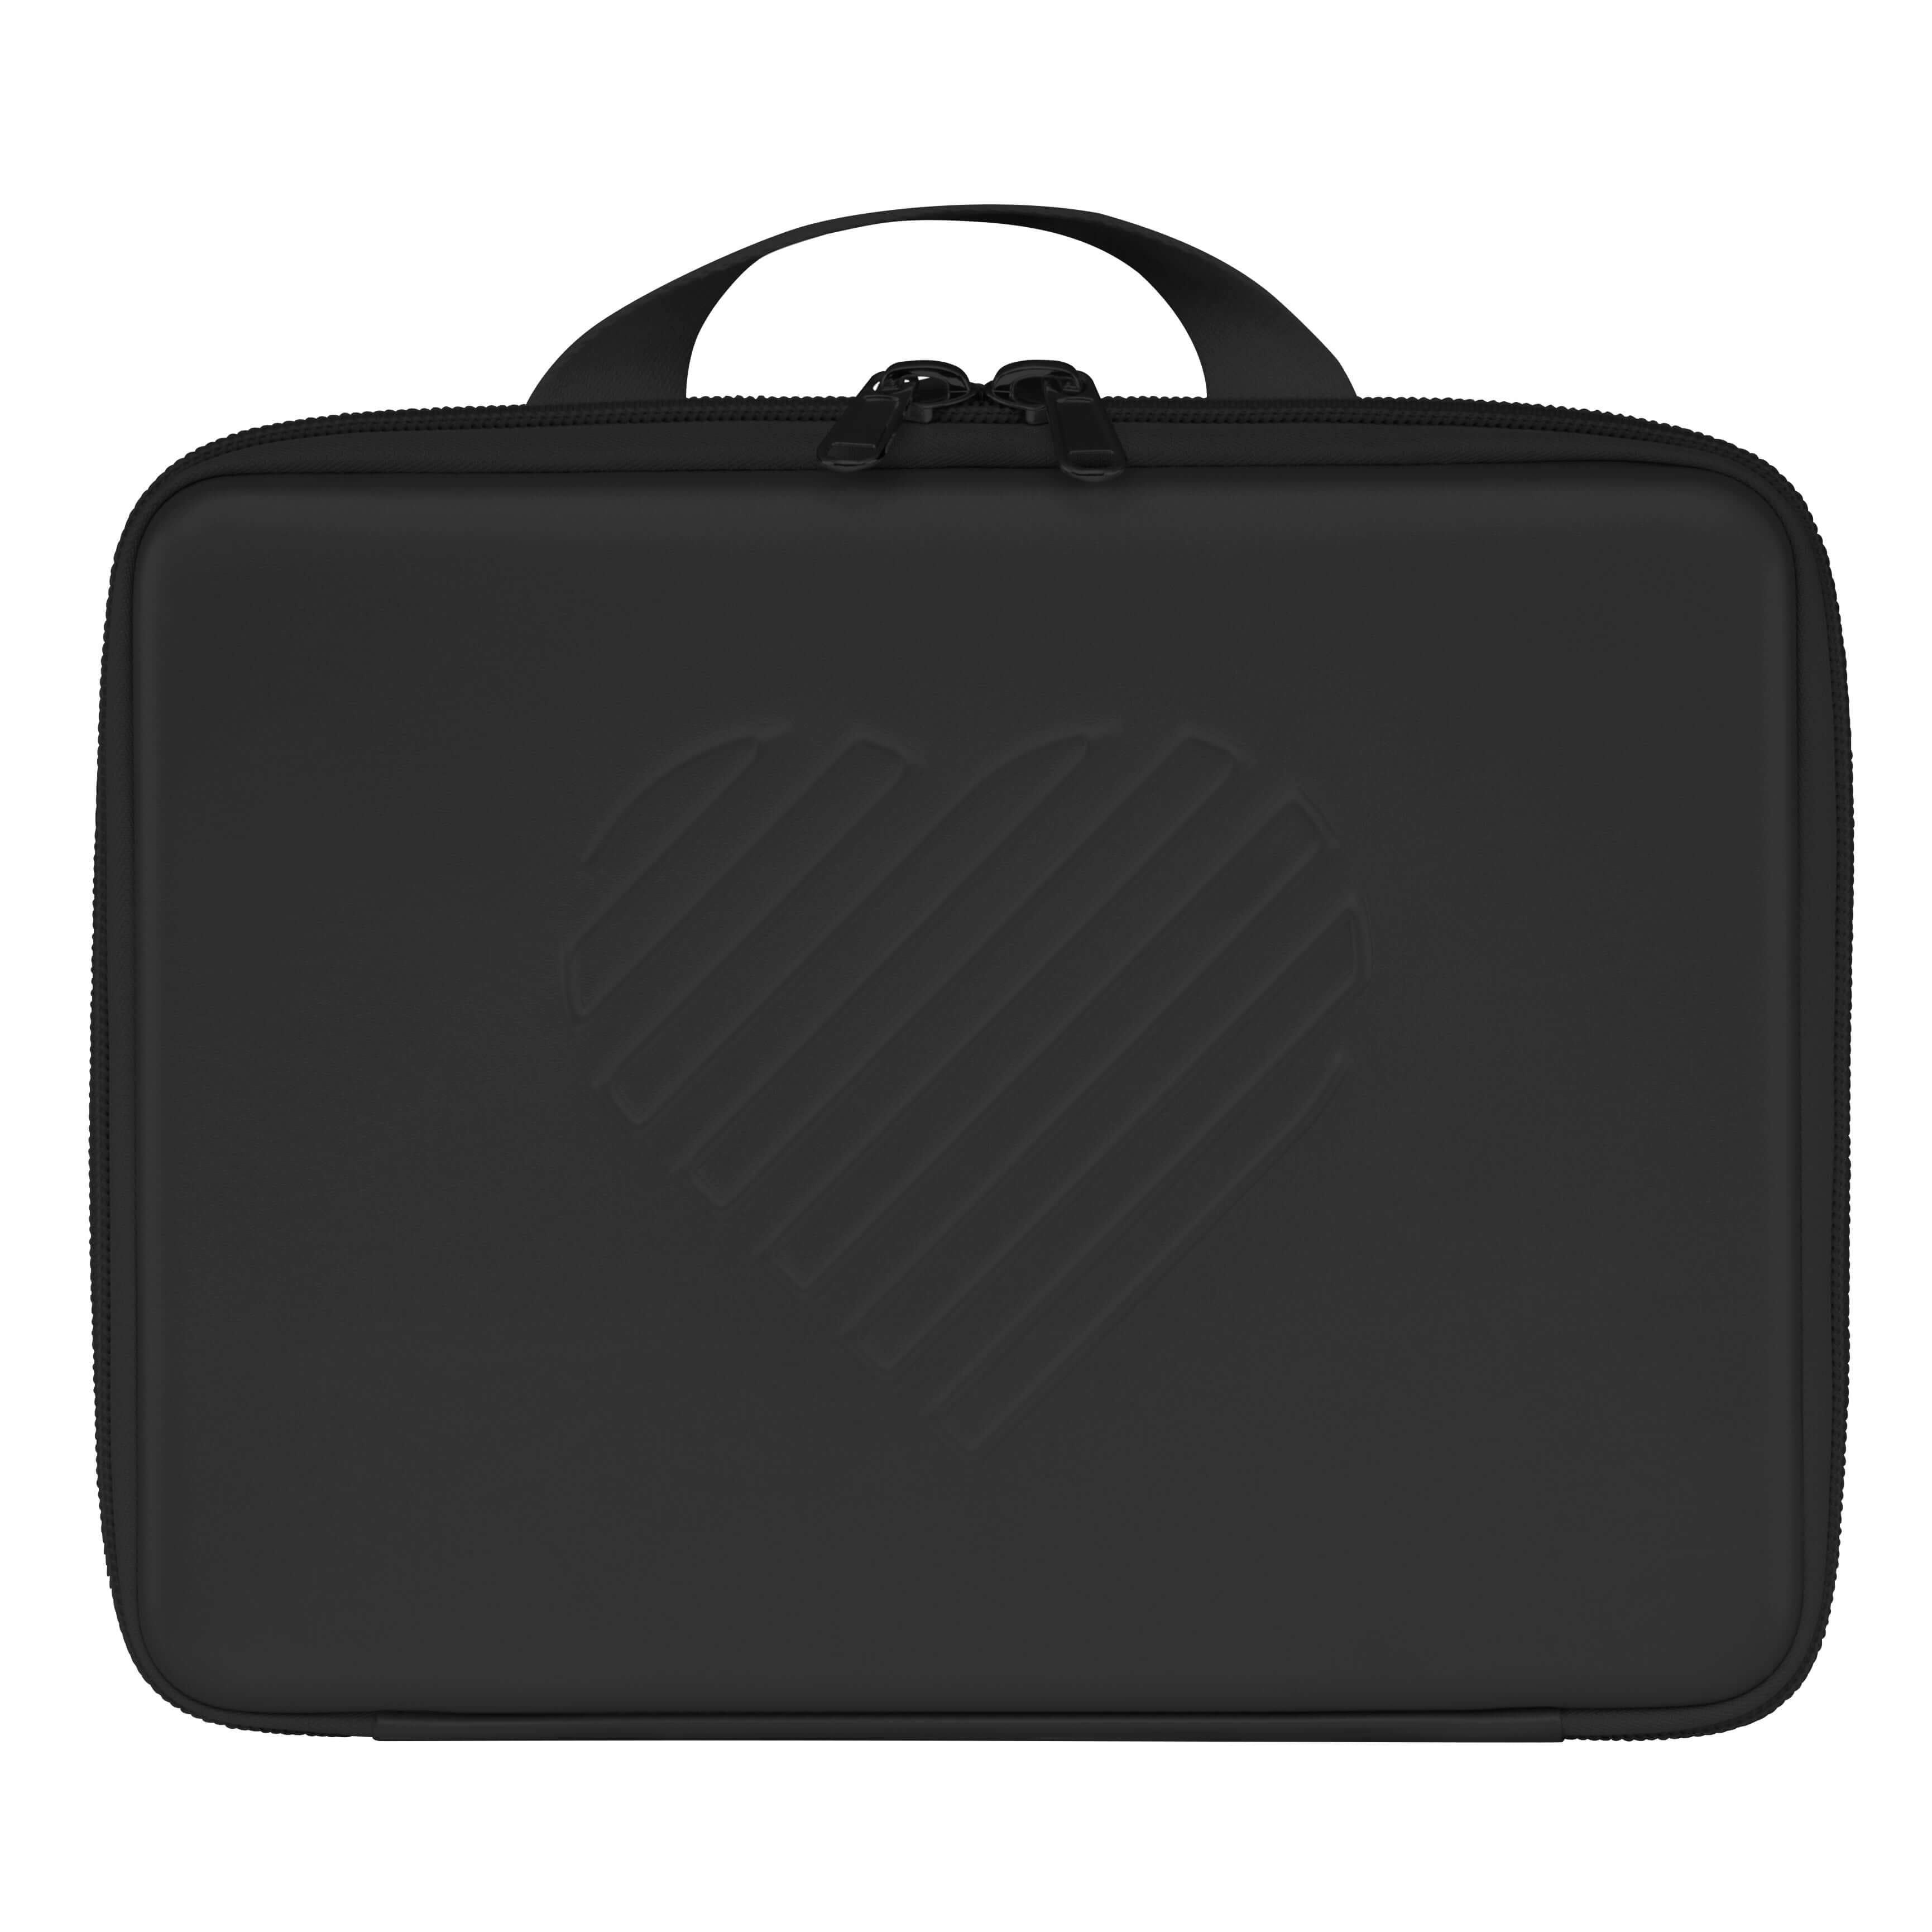 Black RIKI Carry Case: Sleek design with minor imperfections, unbeatable value.